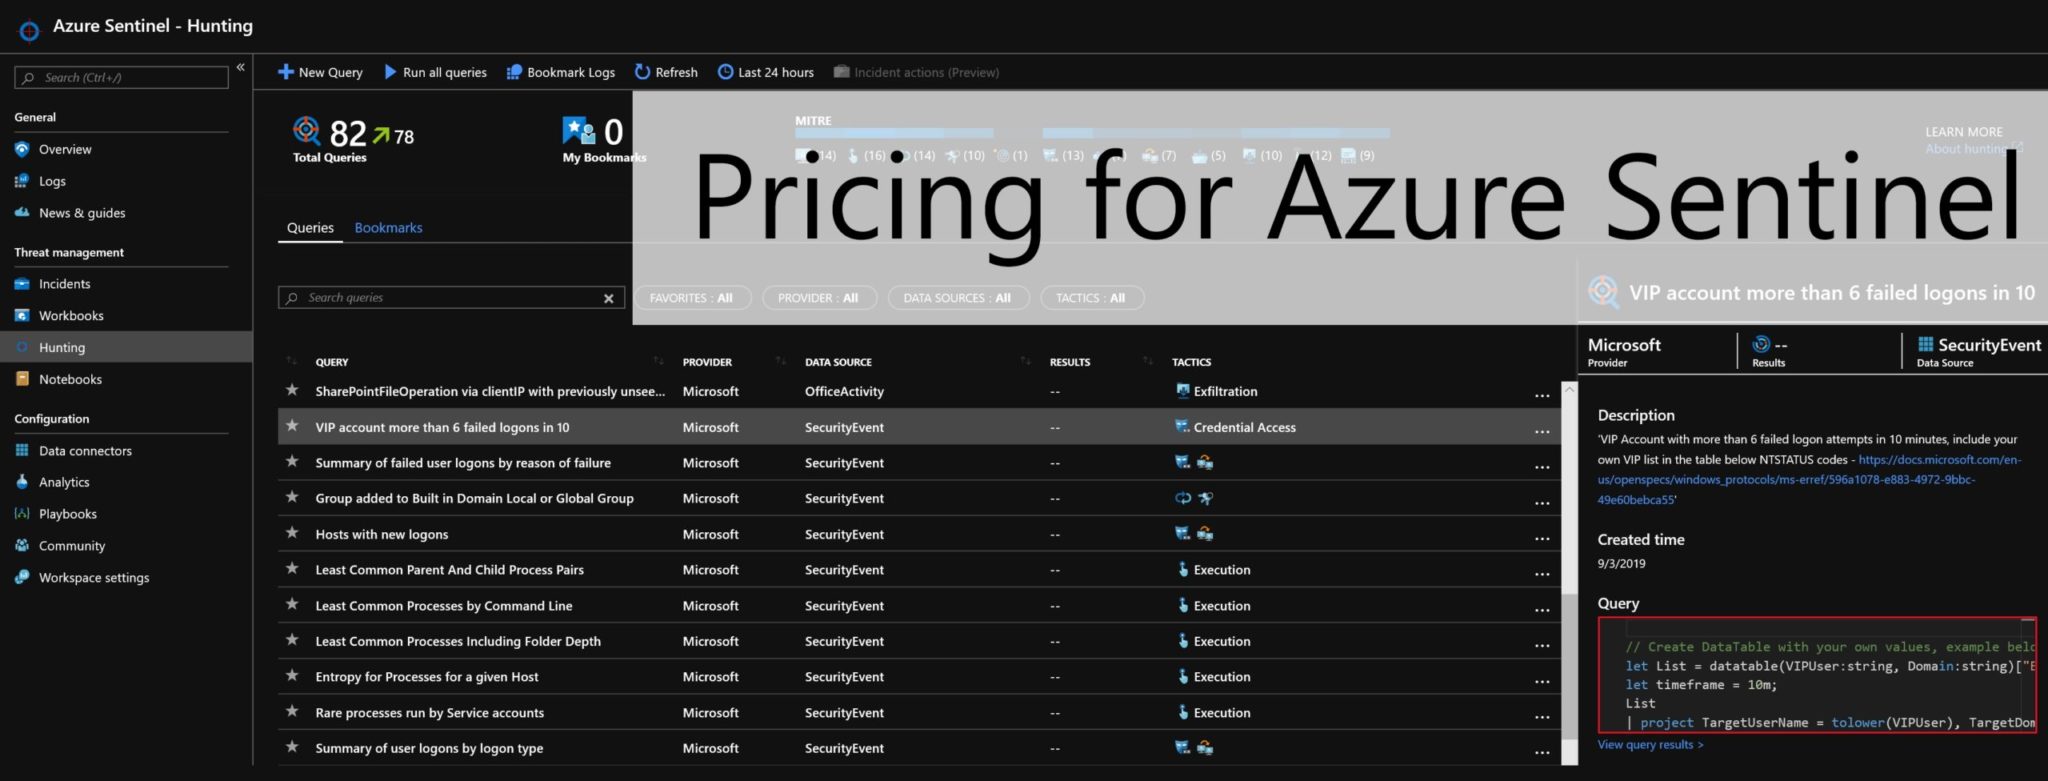 Pricing for Azure Sentinel is GA 2